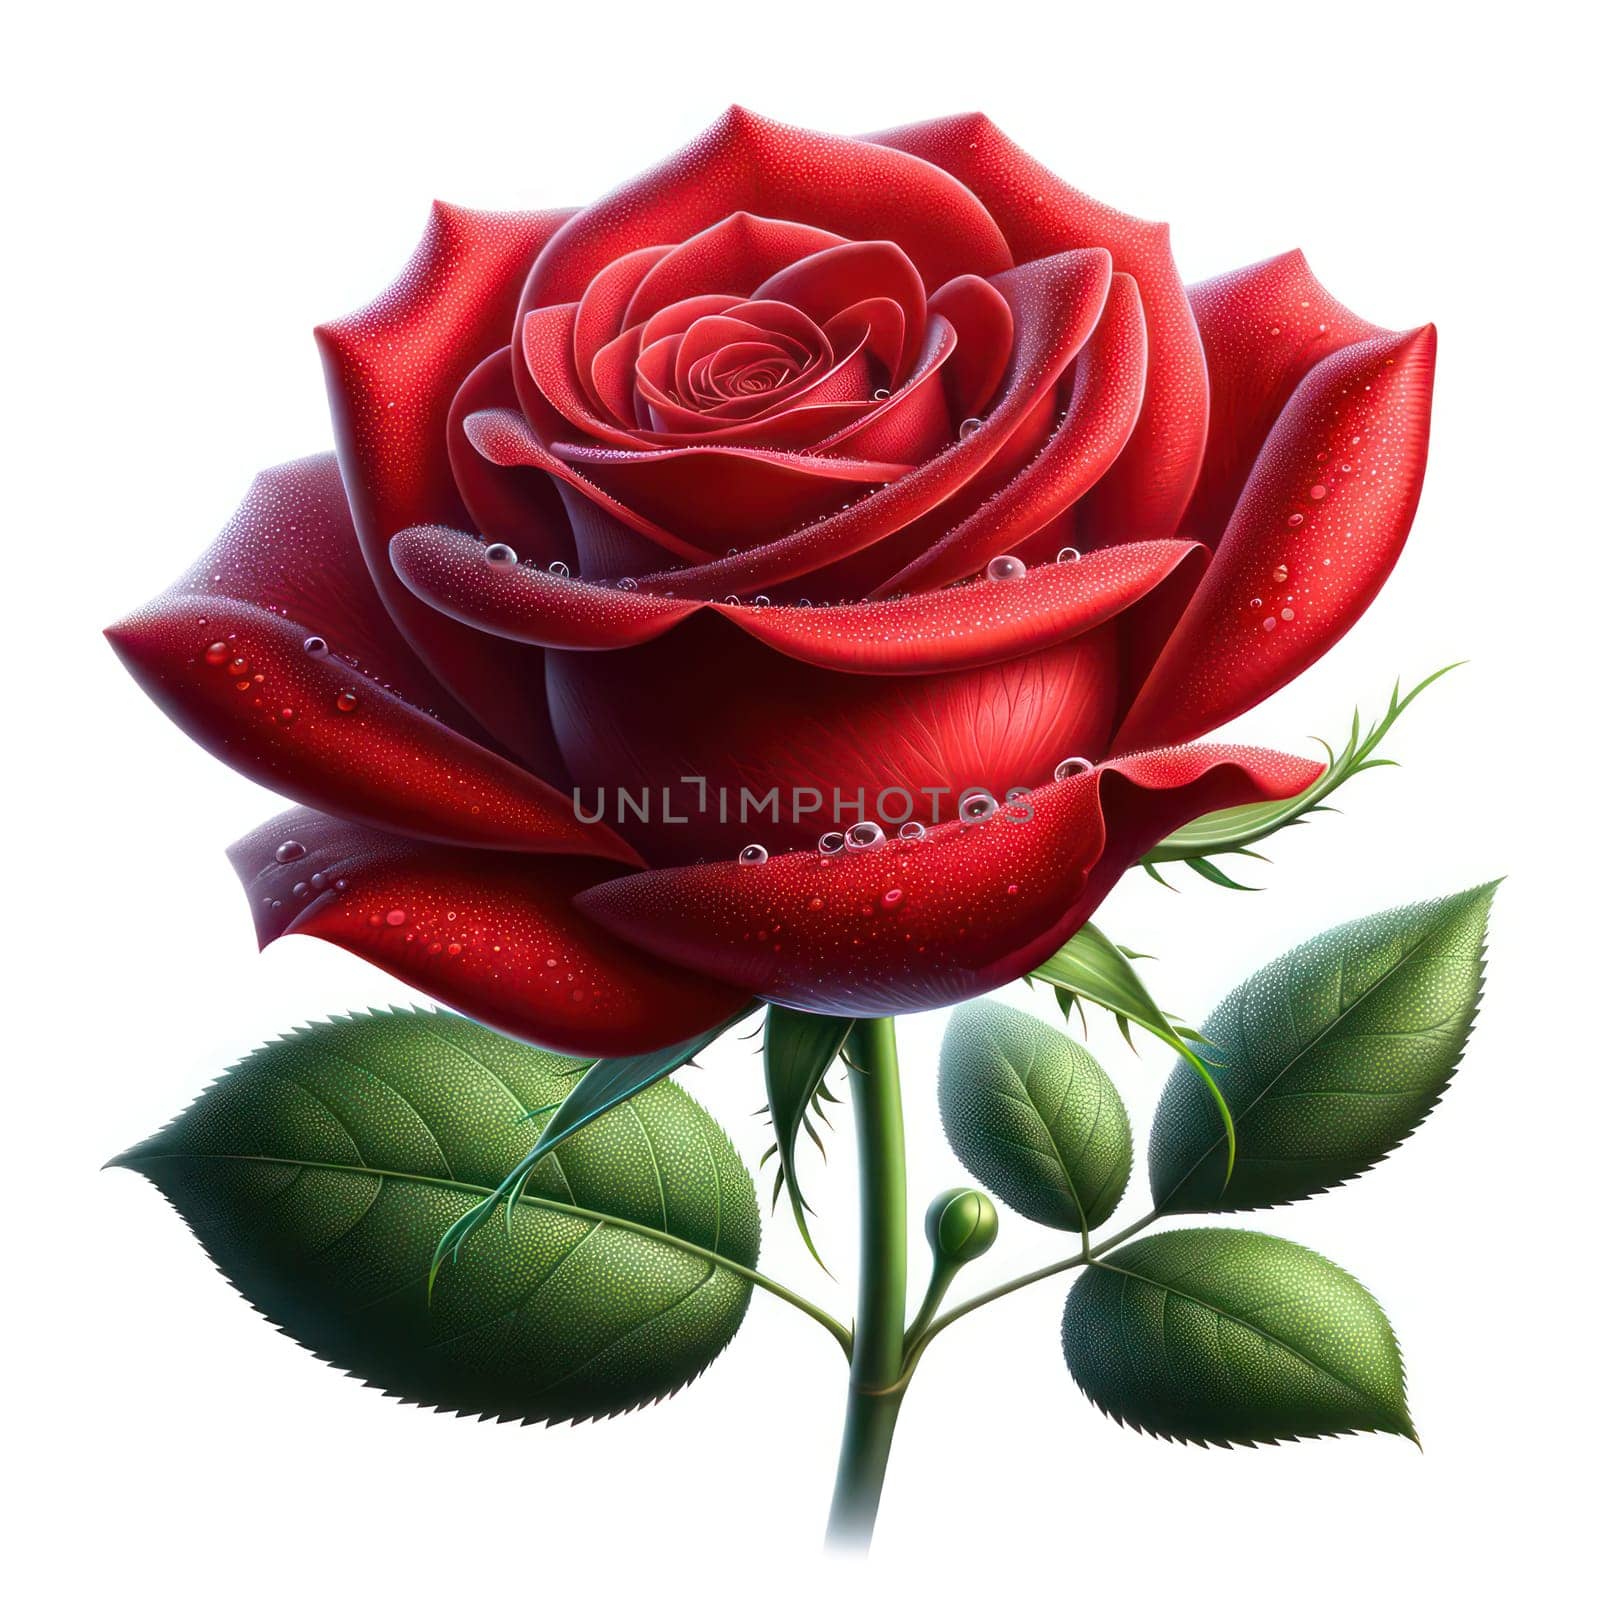 Vivid Red Rose with Soft Petals and Green Leaf, Symbol of Love and Beauty by Dvorak